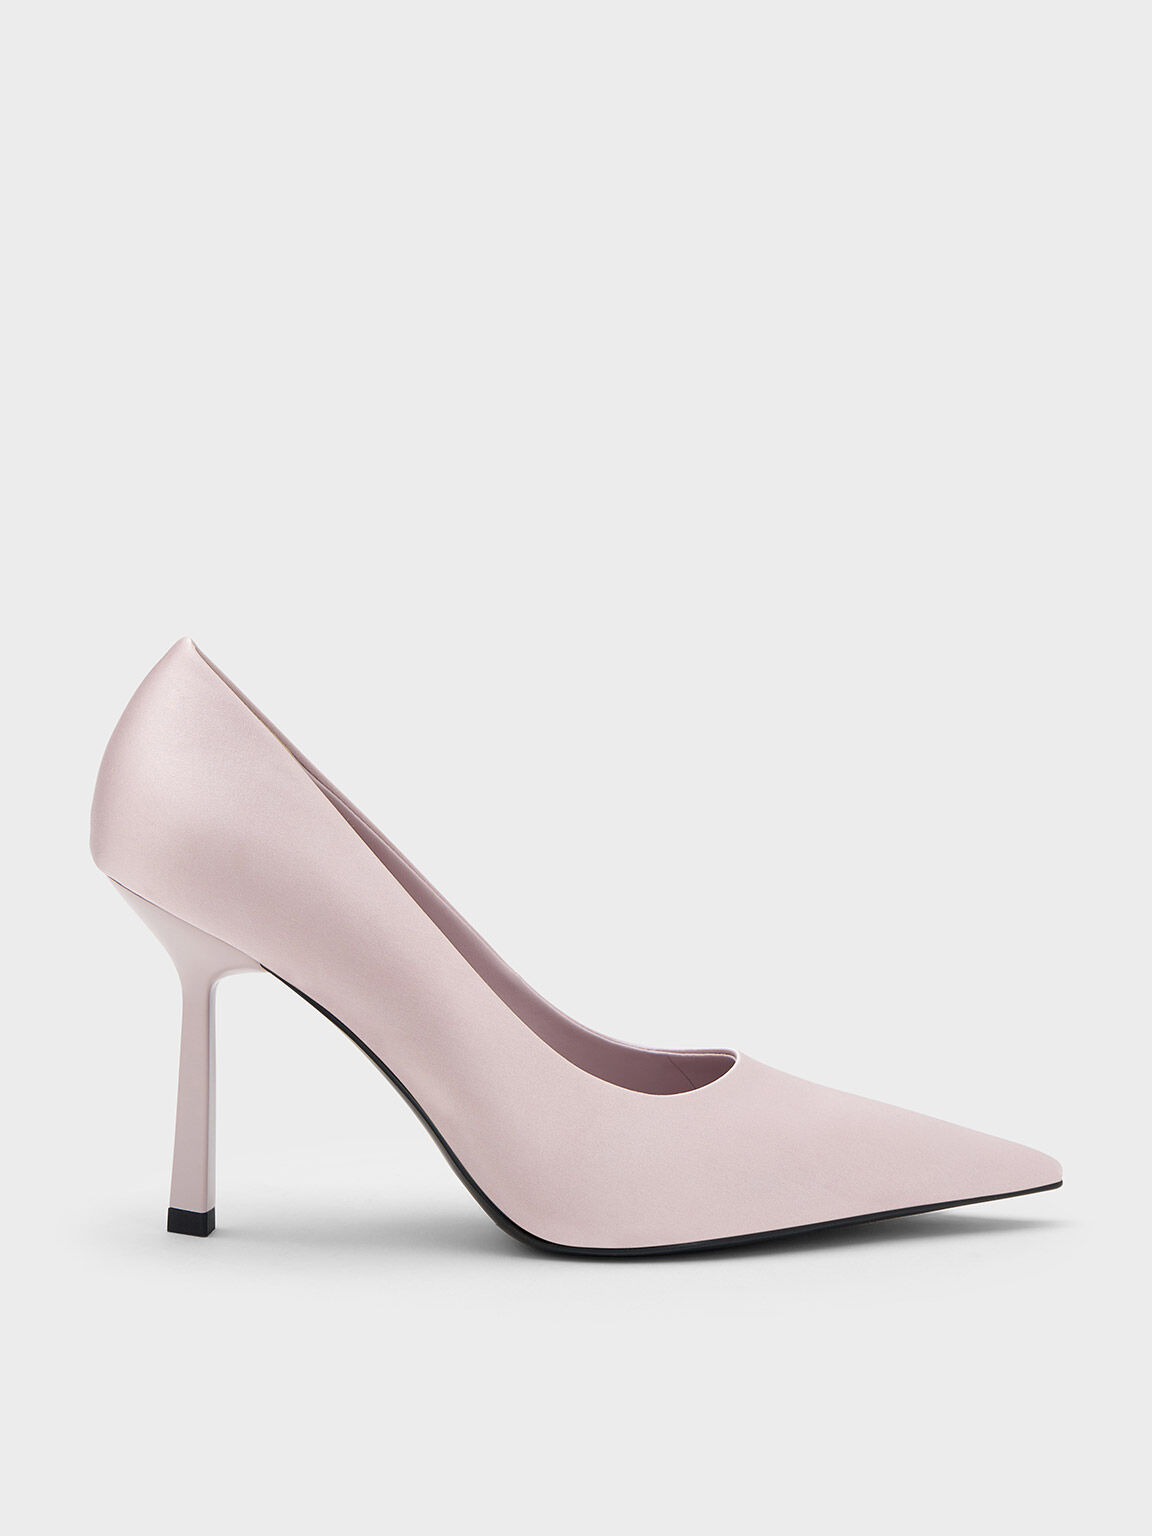 Buy Lilac Heeled Sandals for Women by Fyre Rose Online | Ajio.com